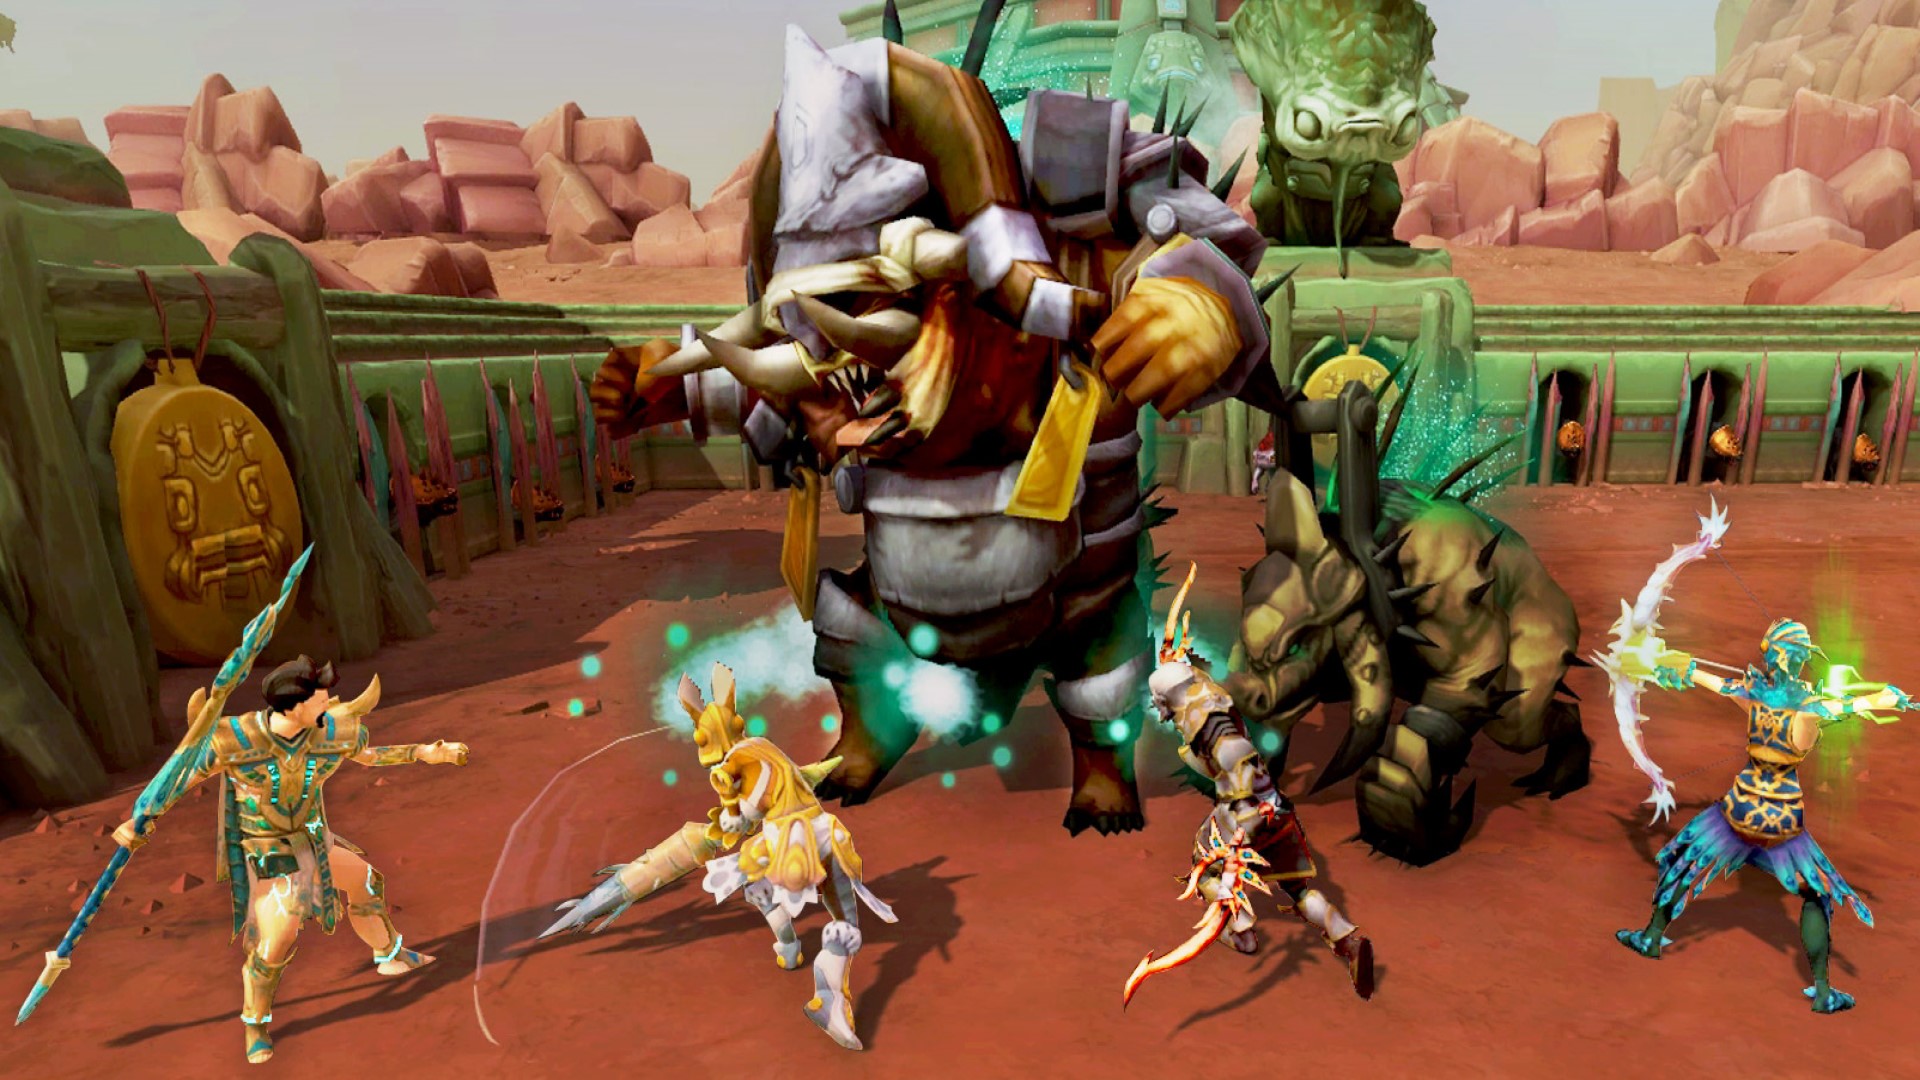 Best mobile multiplayer games: Runescape Mobile. Image shows a group of people fighting a boar-like creature.